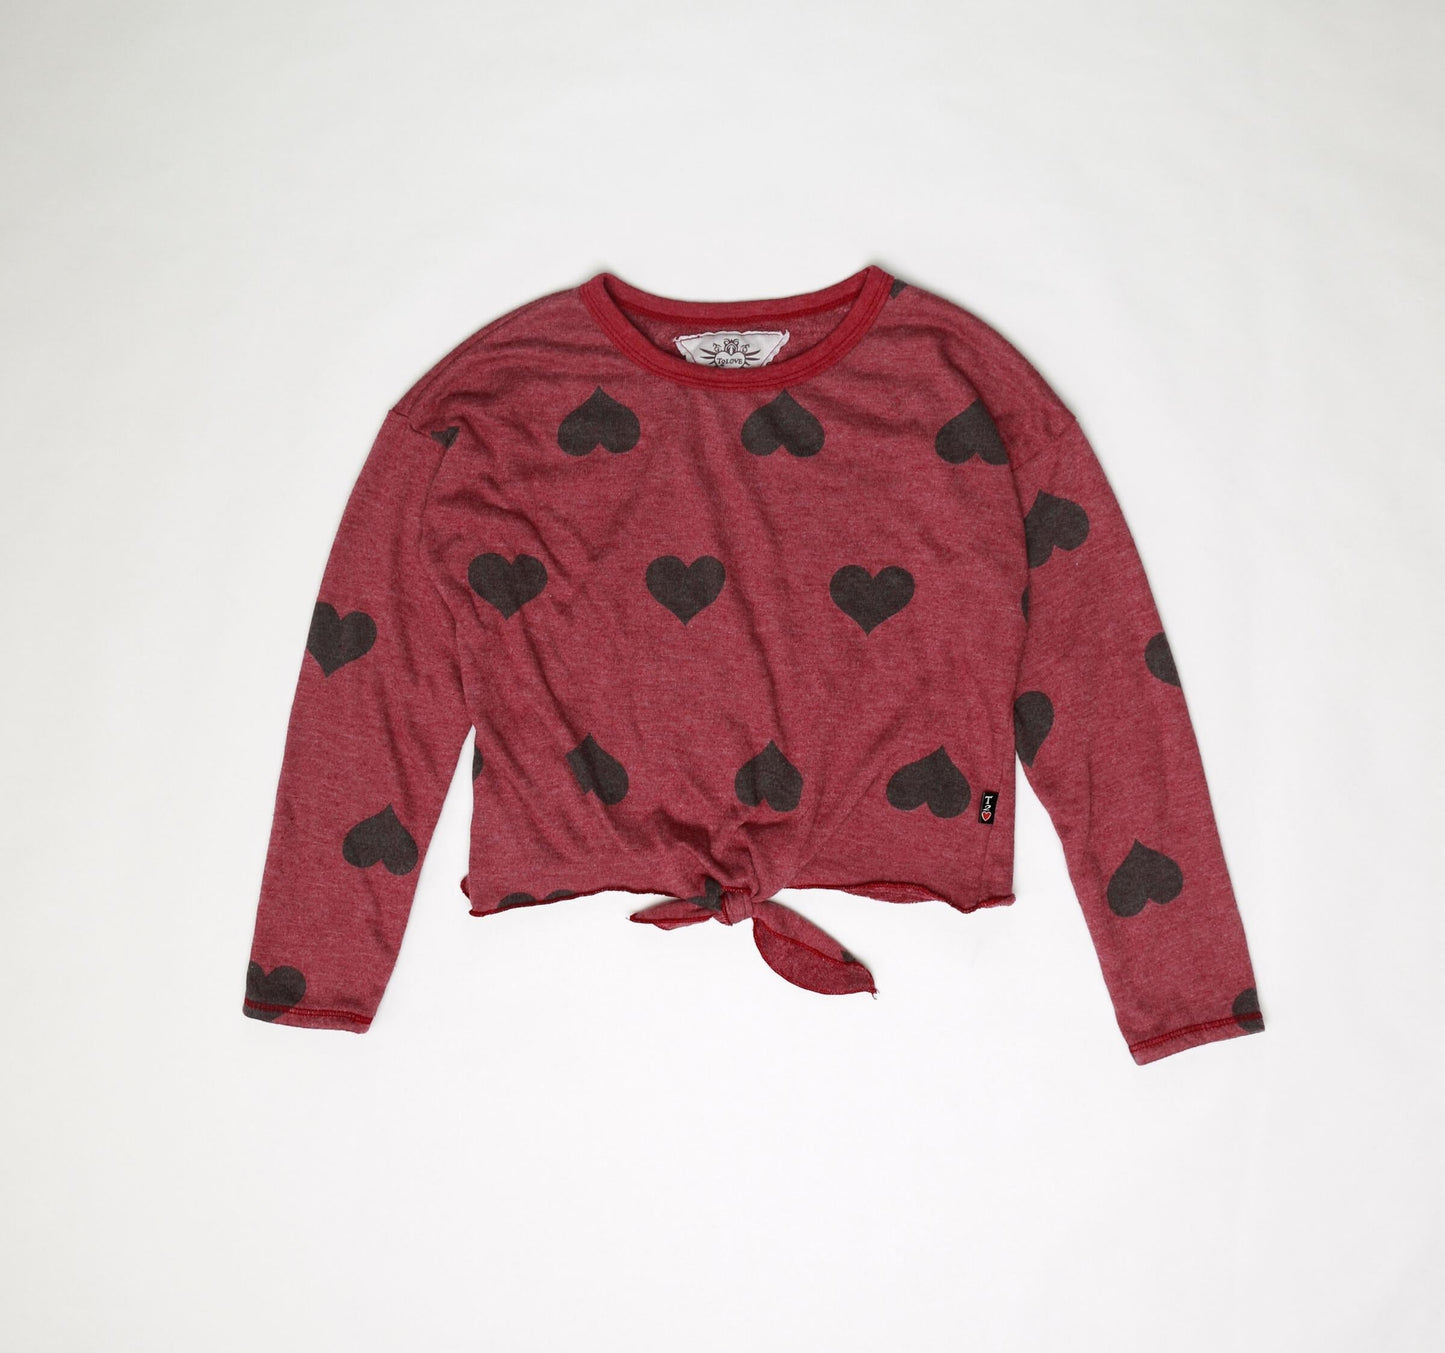 Heart-Print Raw-Edged Tie-Front Shirt